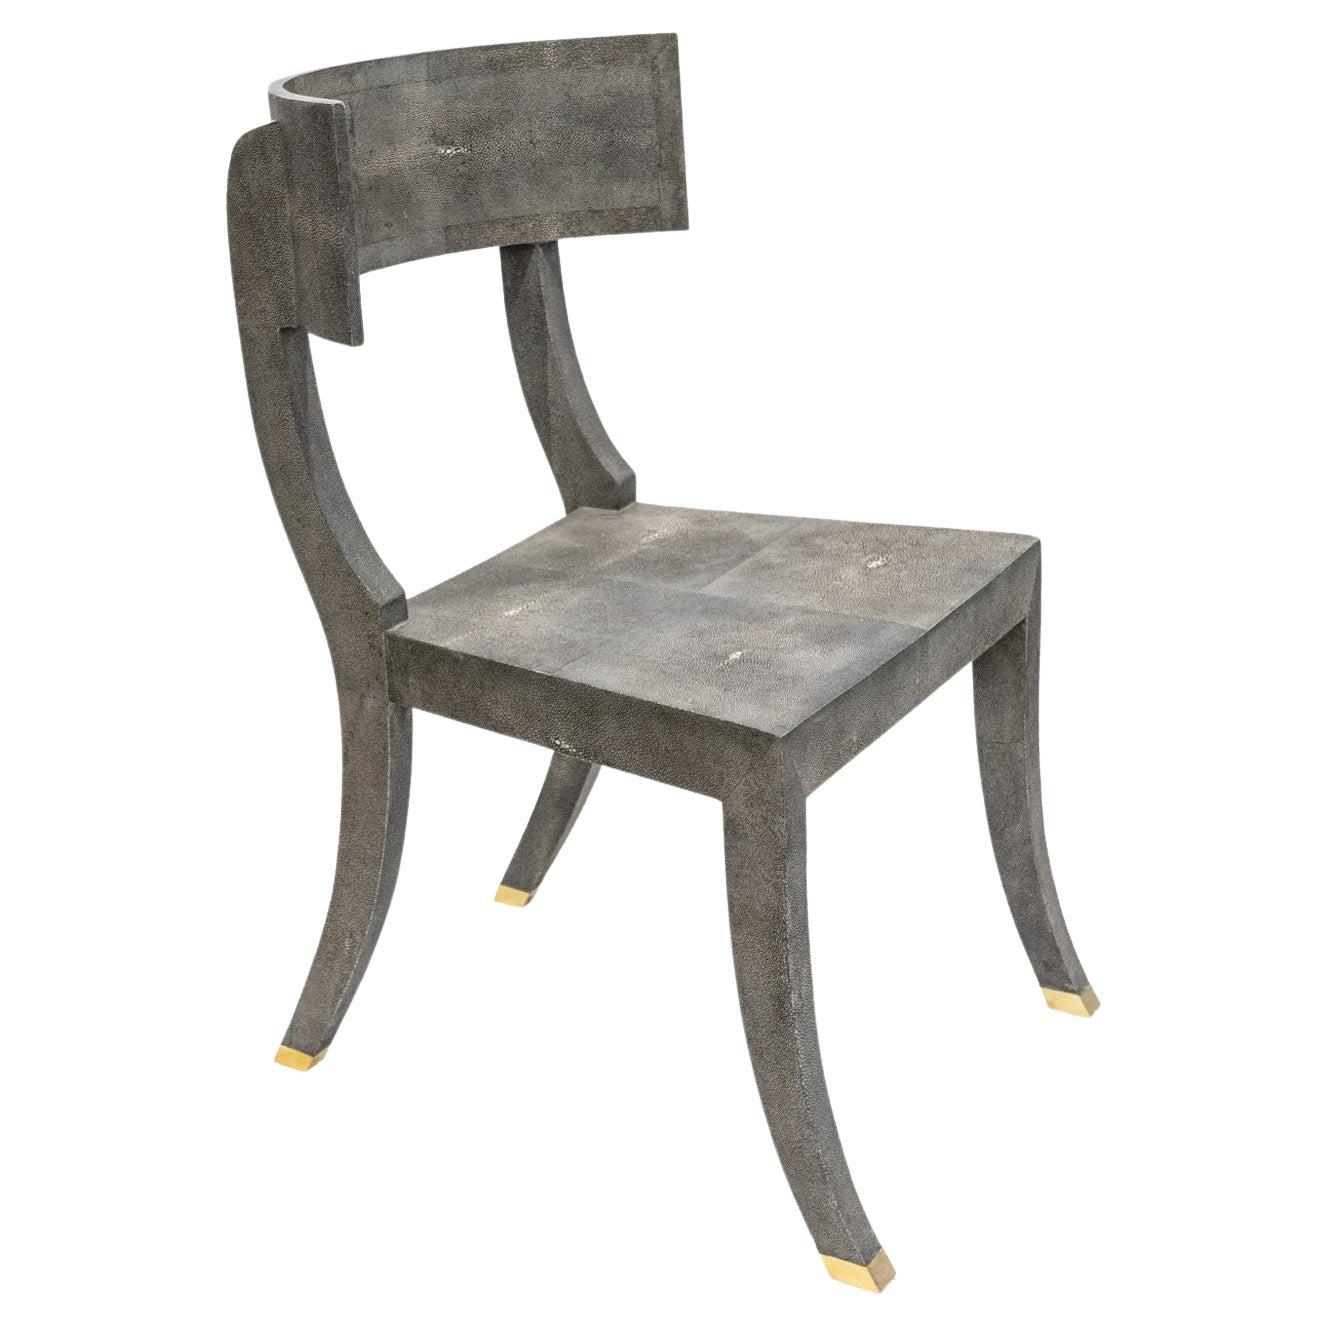 Exquisite Klismos Chair in Blue/Gray Shagreen with Brass Sabots 1980s For Sale